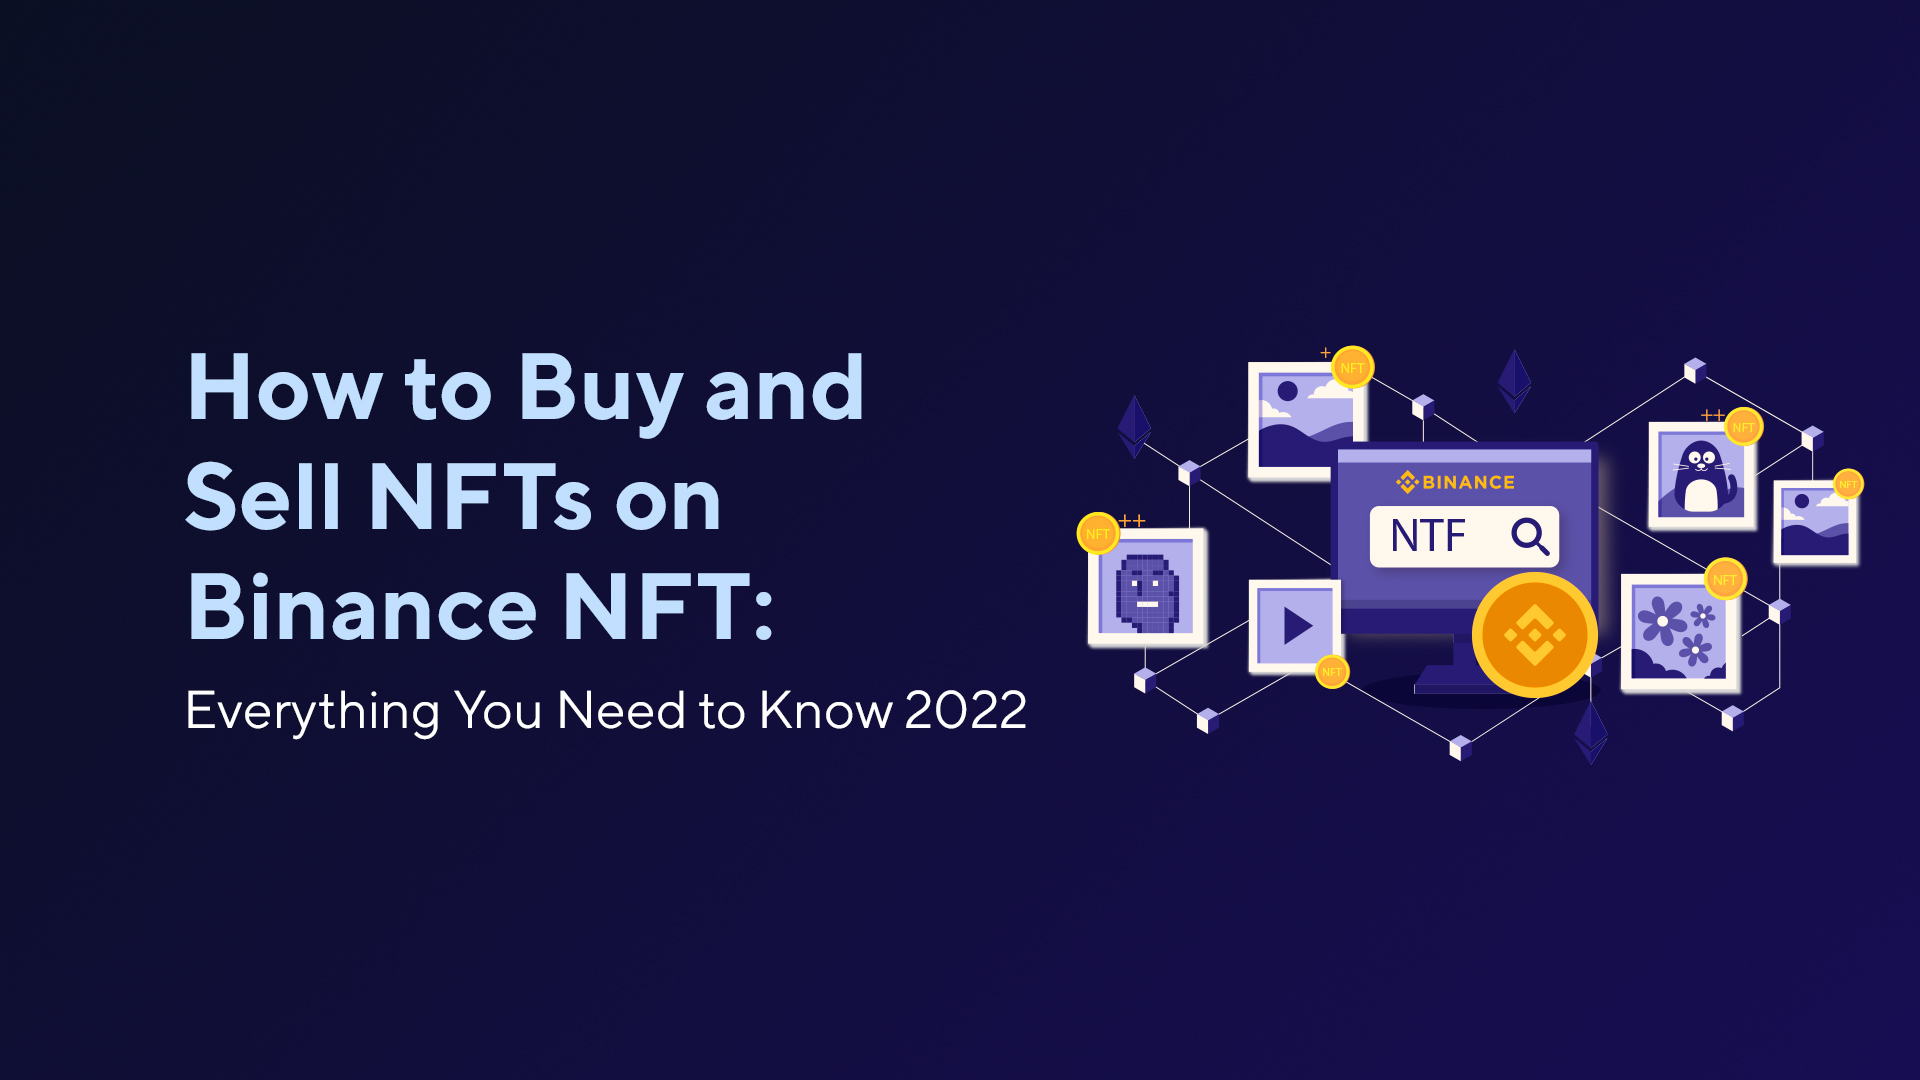 How to Buy and Sell NFTs on Binance NFT: Everything You Need to Know 2023